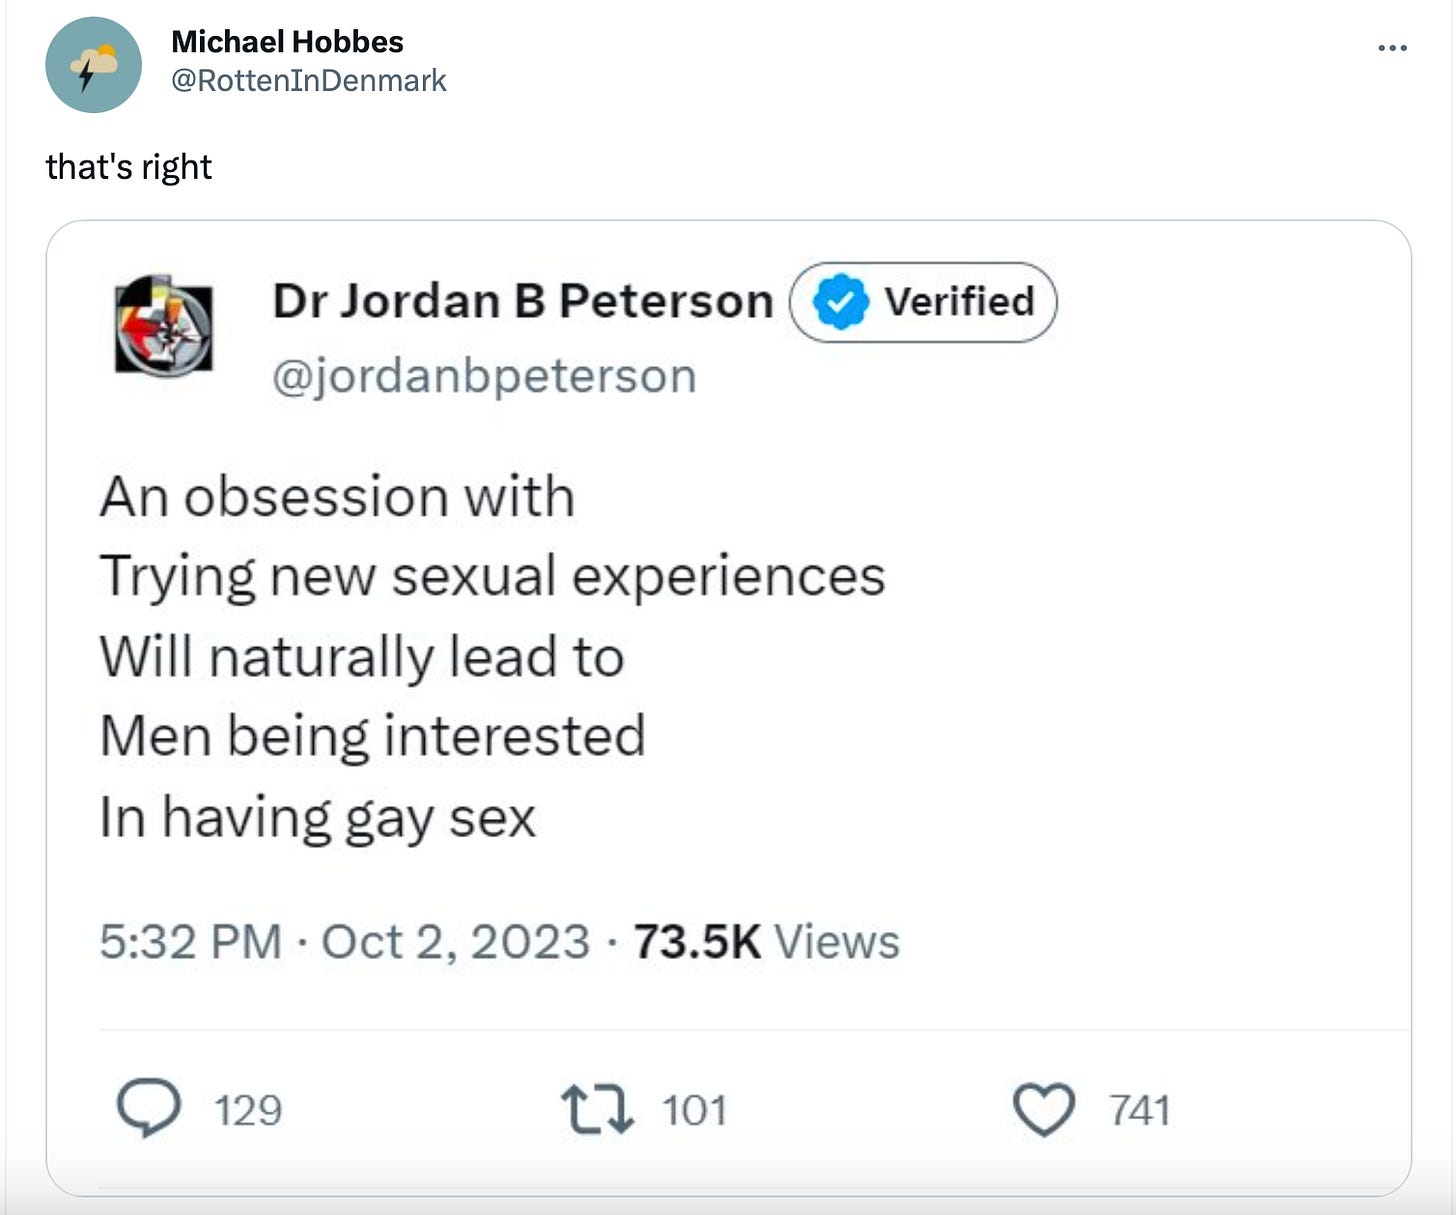 An obsession with trying new sexual experiences will naturally lead to men being interested in having gay sex